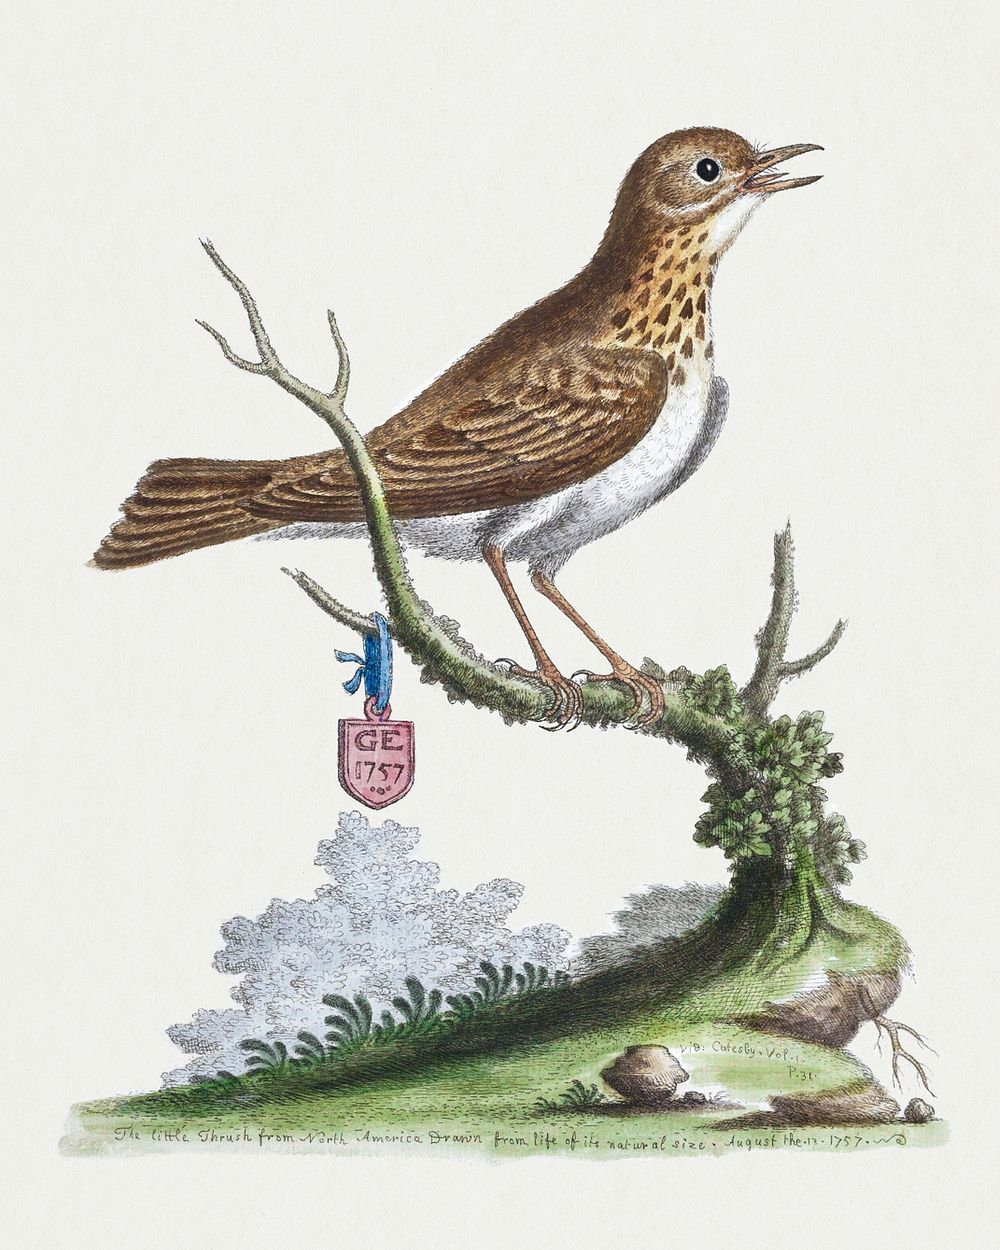 The little Thrush from North America (1757) print in high resolution by George Edwards. Original from The Beinecke Rare Book…